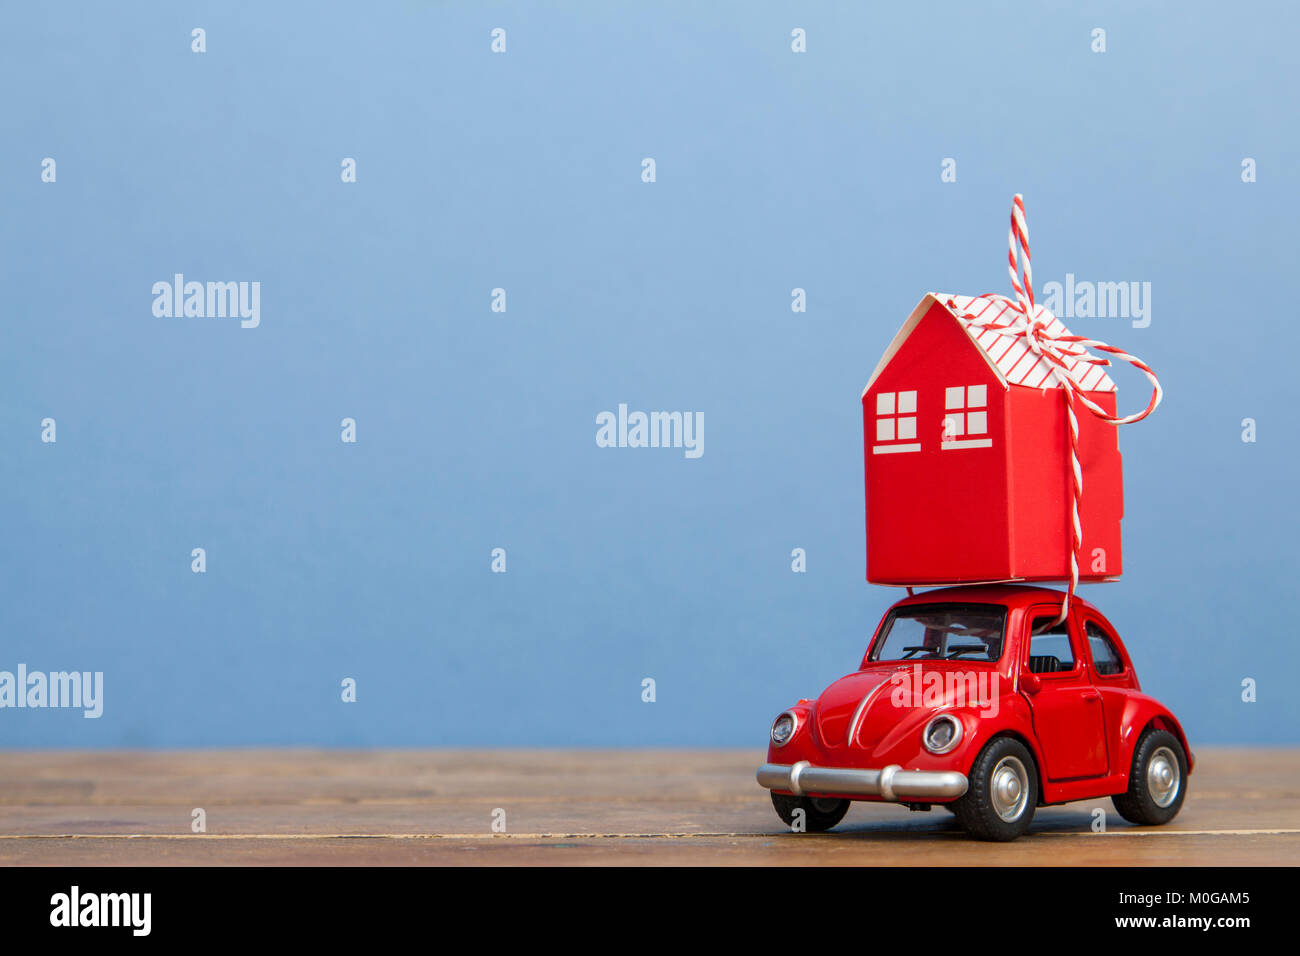 LONDON, UK - JANUARY 19th 2018: A toy oy car carrying a stack of houses against a blue background. Moving house concept Stock Photo